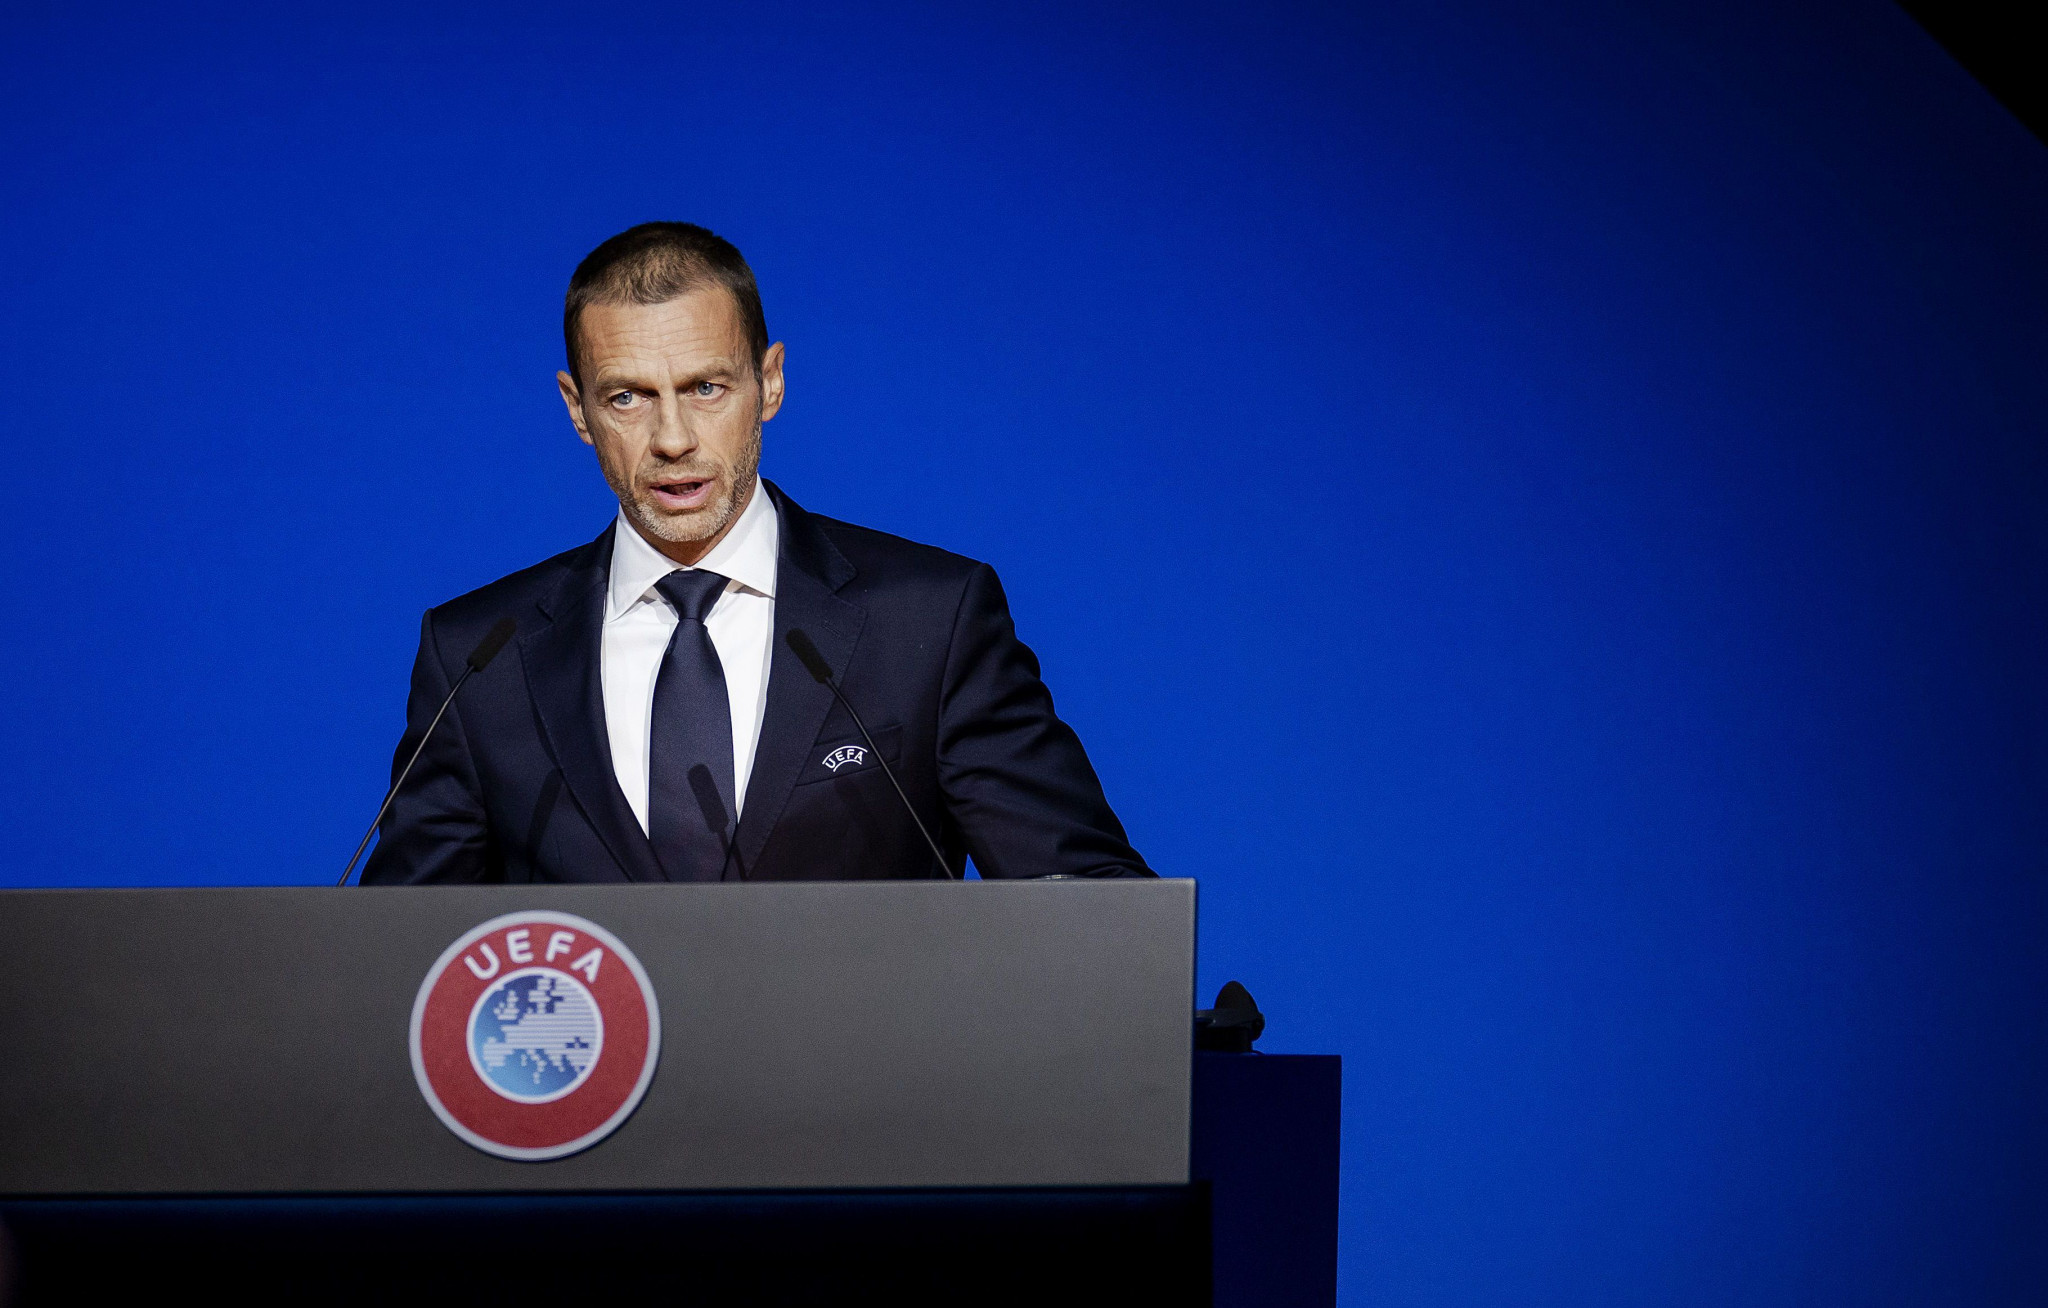 UEFA President Aleksander Čeferin predicts football will be stable and united in 2022 ©Getty Images